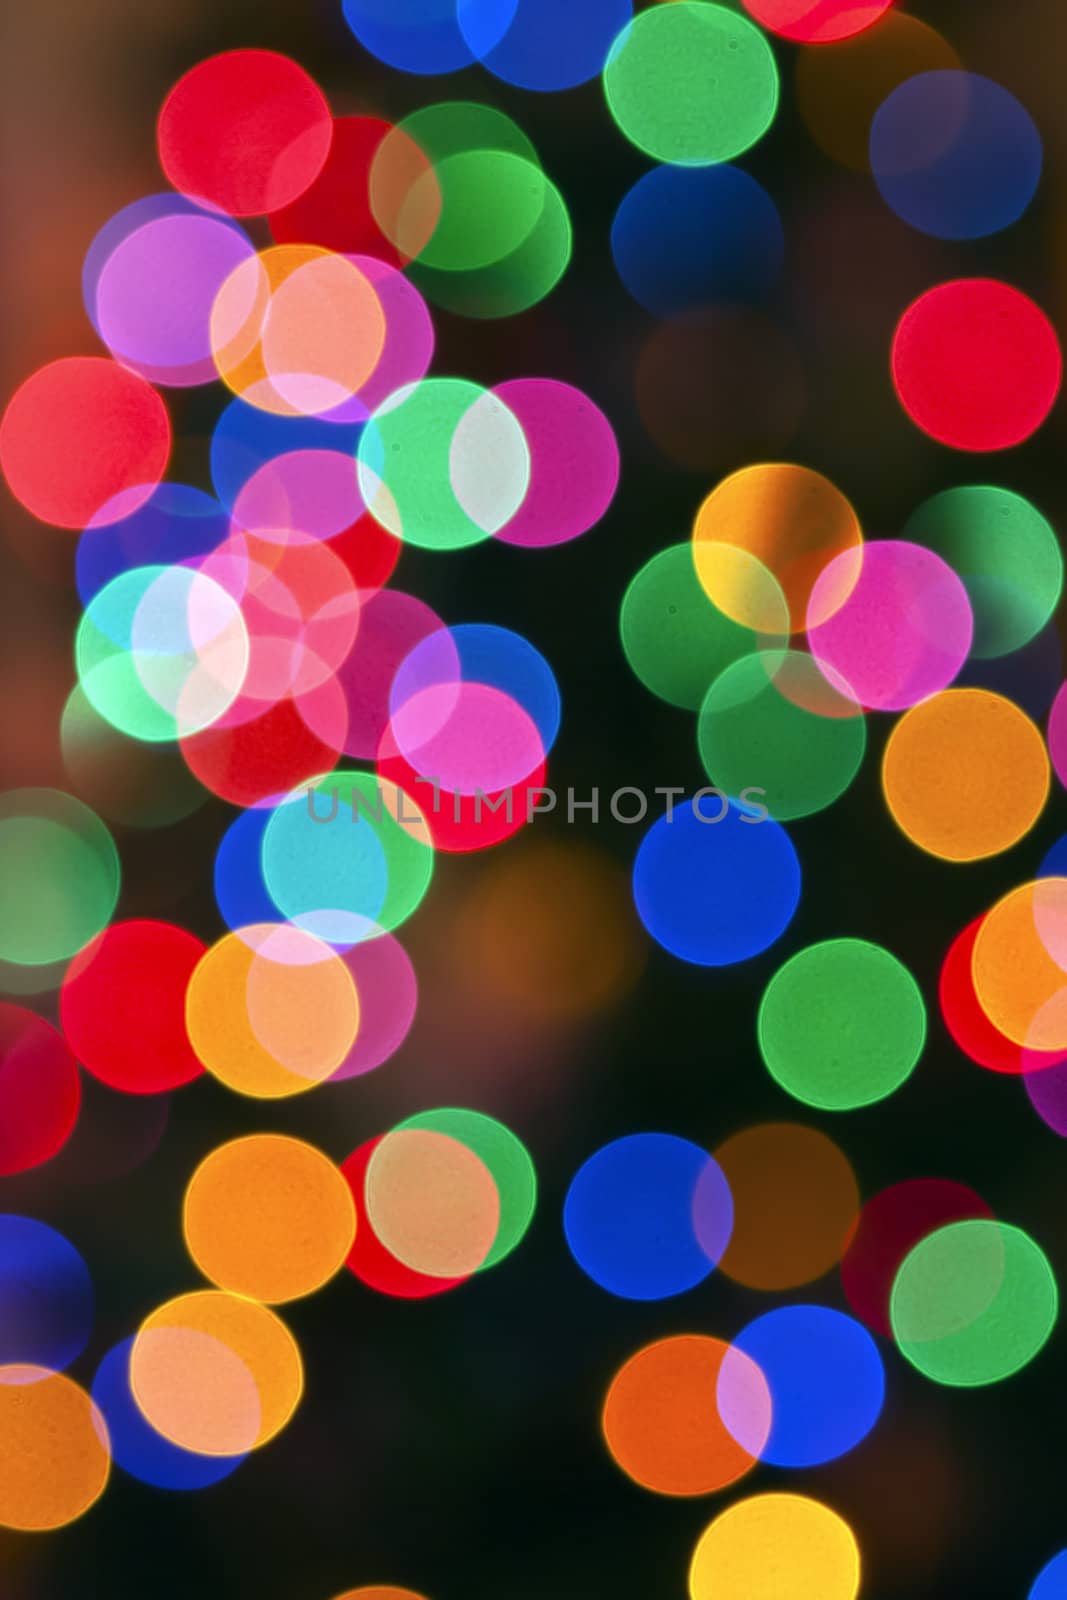 Glowing Christmas lights background  by Coffee999